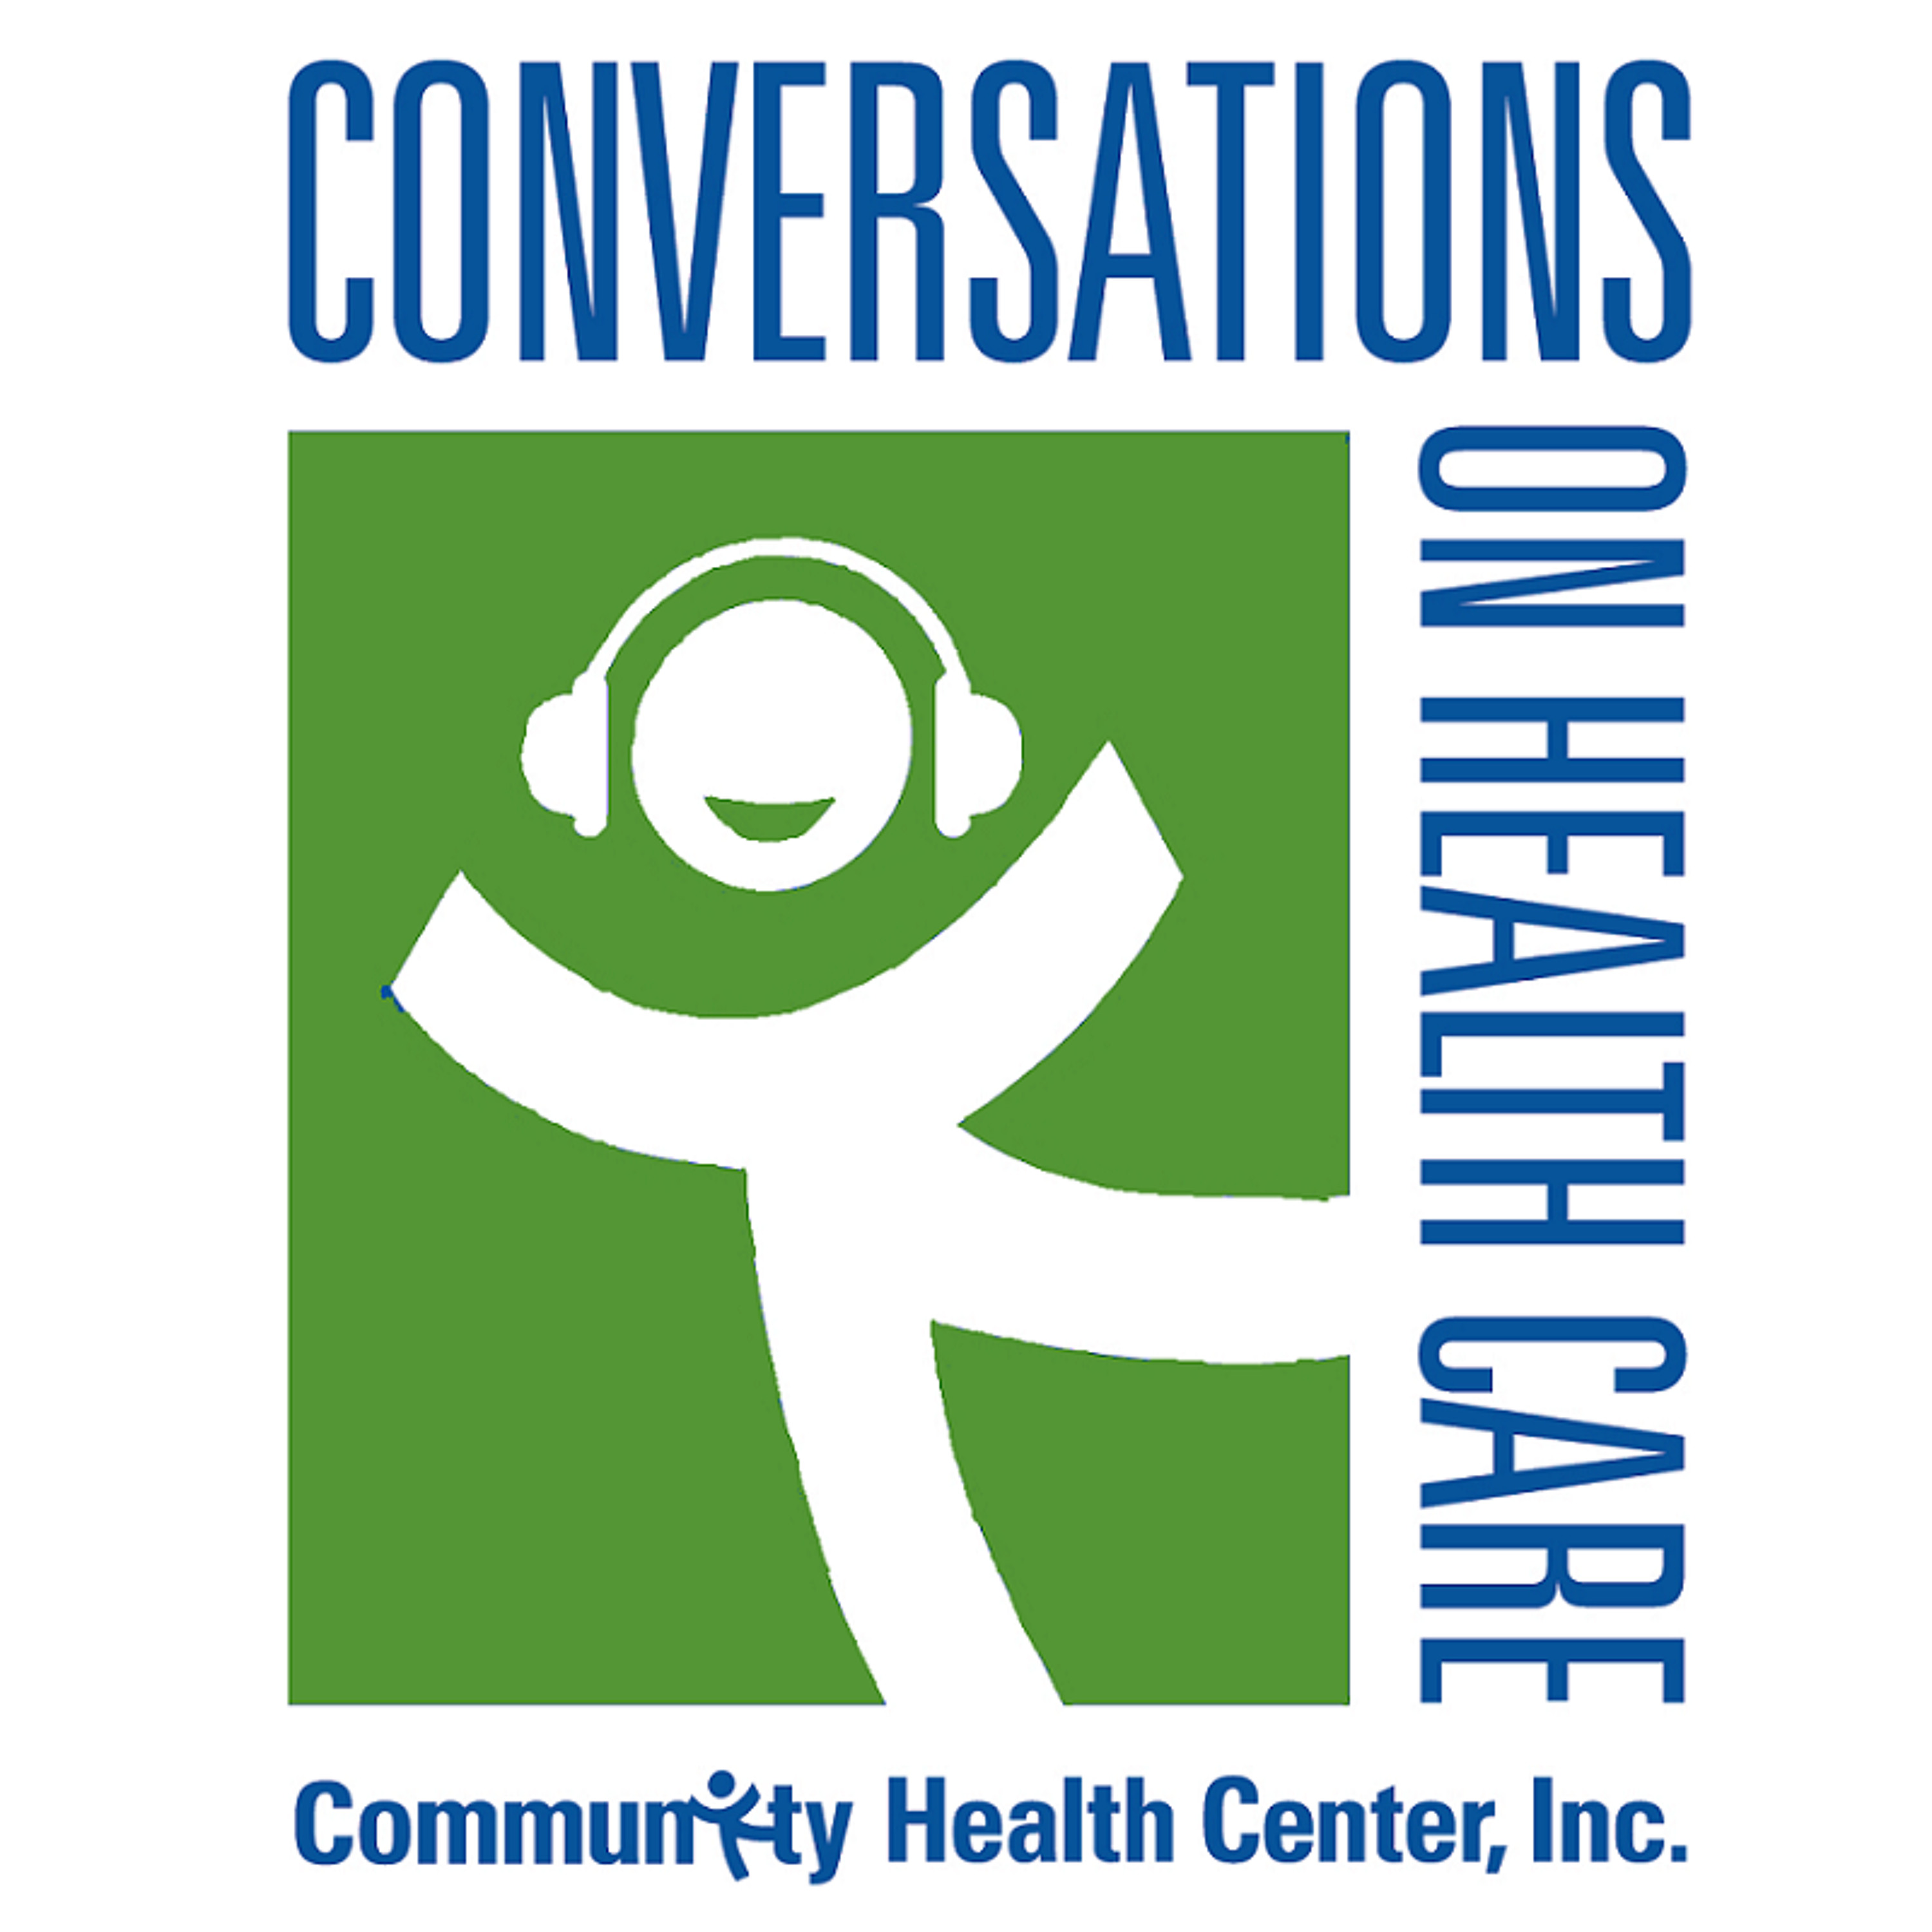 Conversations on HC: Ruth Ann Norton, CEO of Green & Healthy Homes Initiative